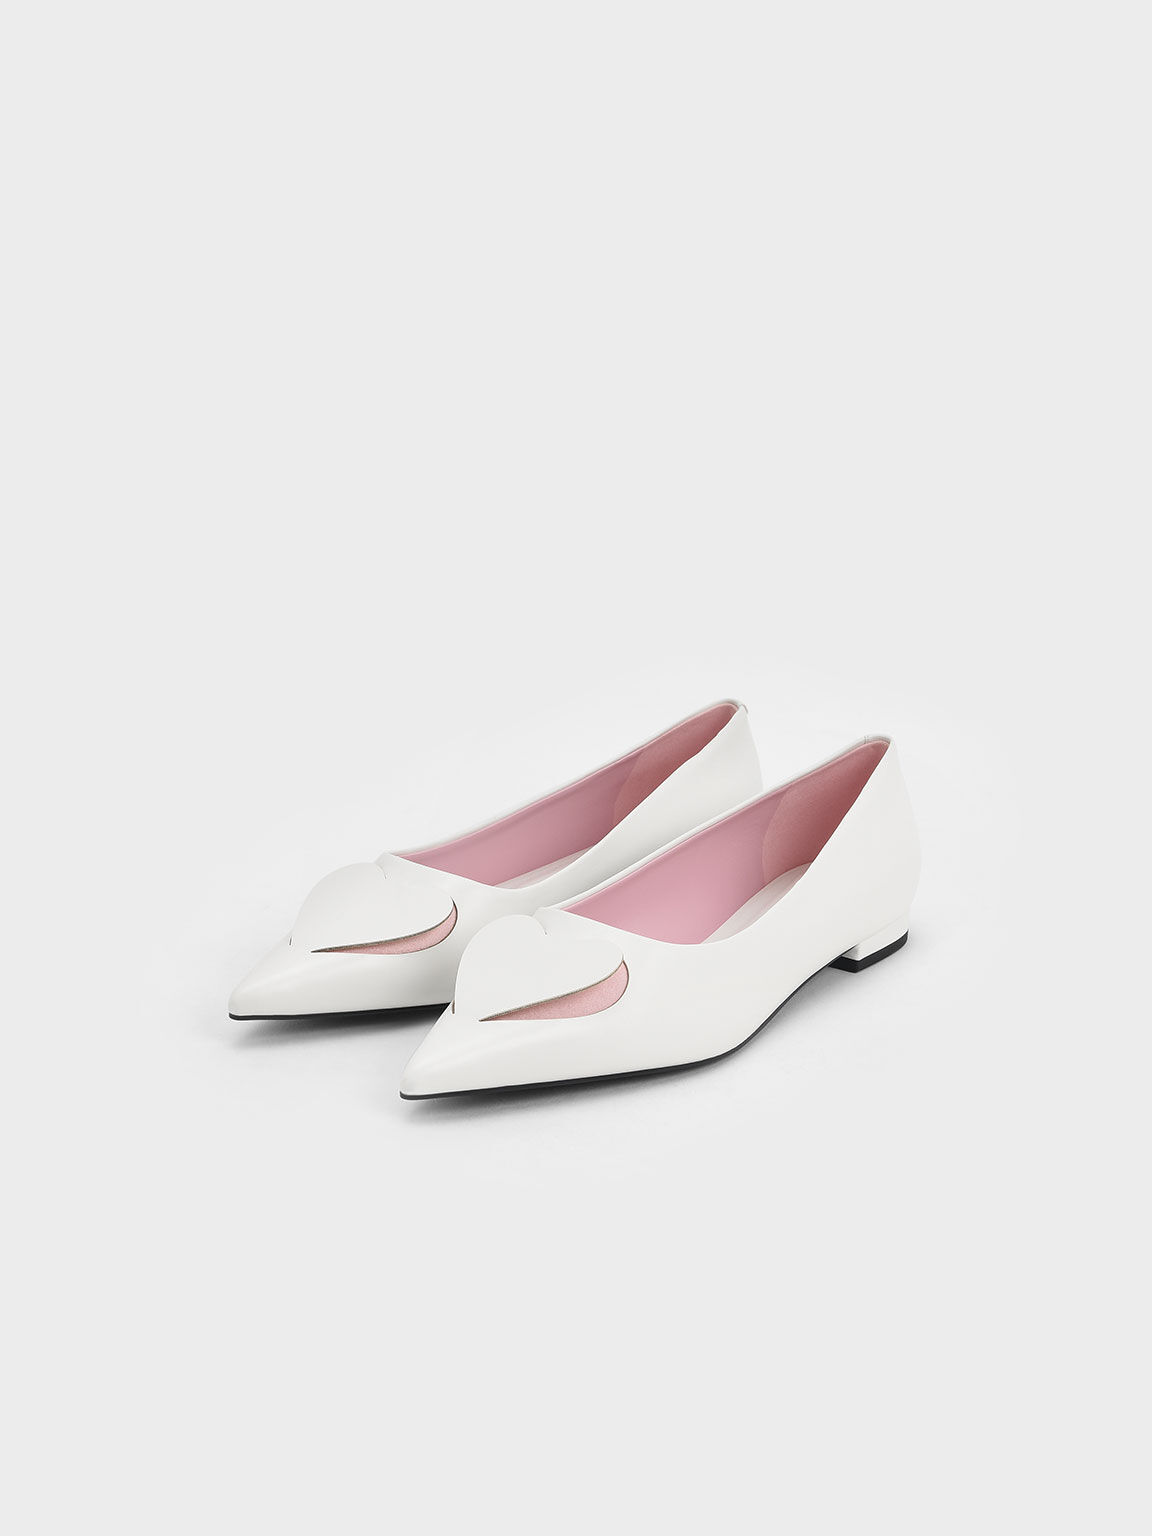 Valentine's Day Collection: Amora Heart Cut-Out Ballerina Pumps, White, hi-res